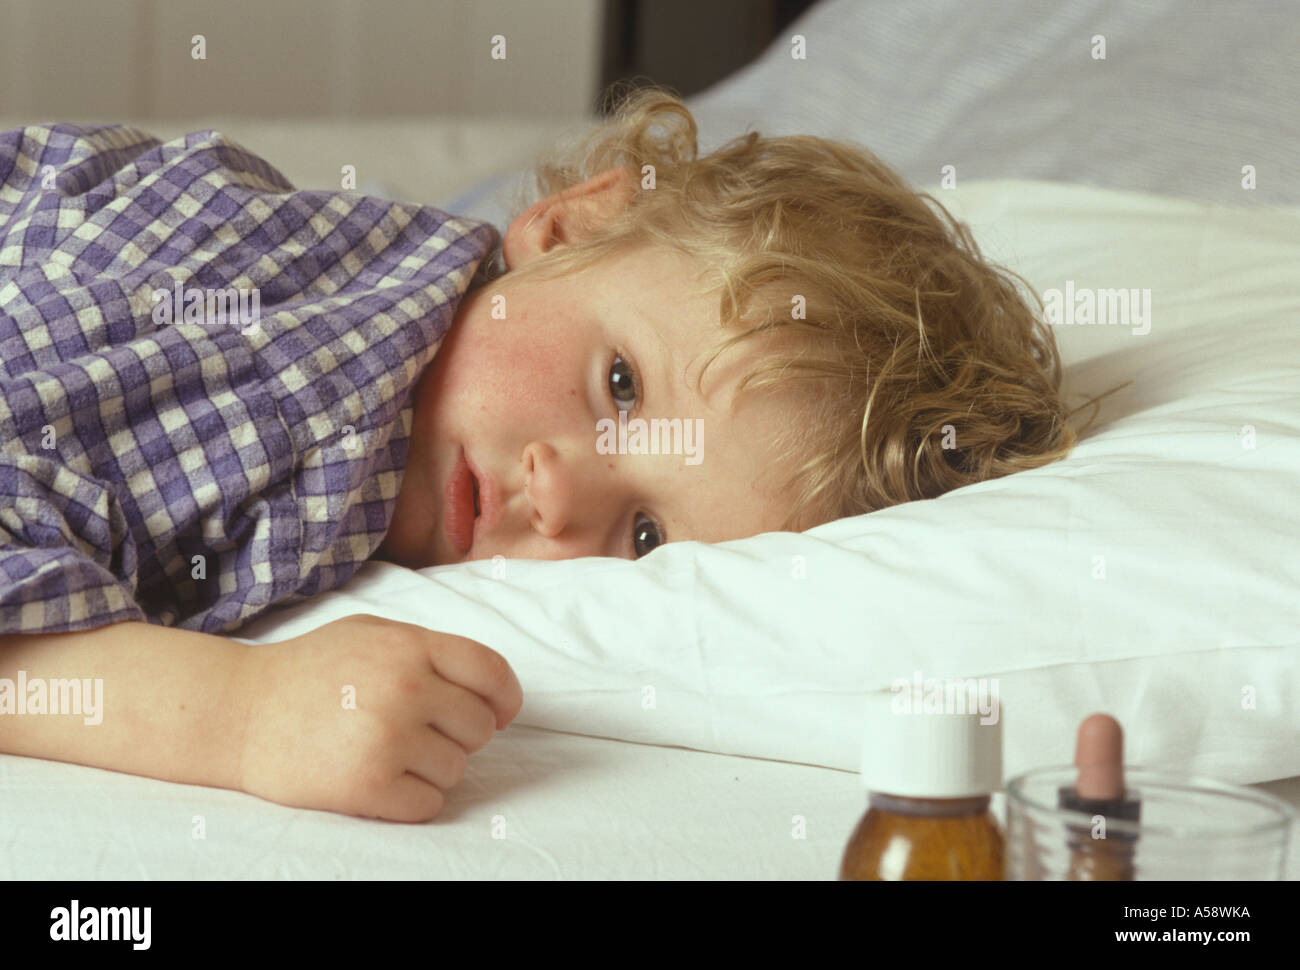 child lying in bed looking ill Stock Photo